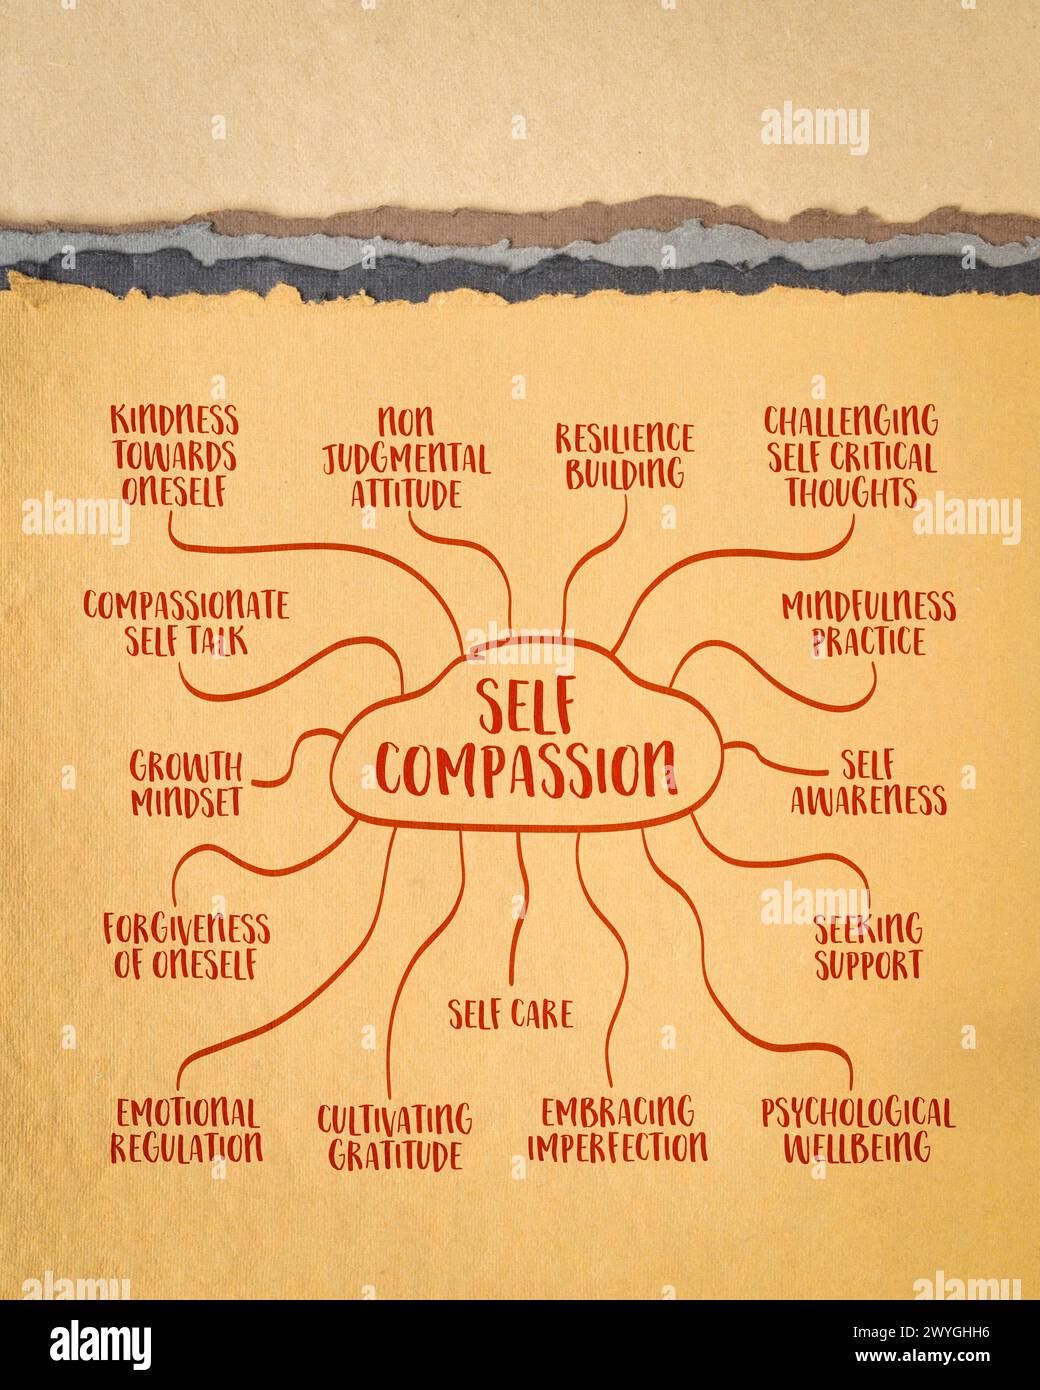 self compasion concept, treating oneself with kindness, understanding, and empathy, mind map sketch on art paper Stock Photo